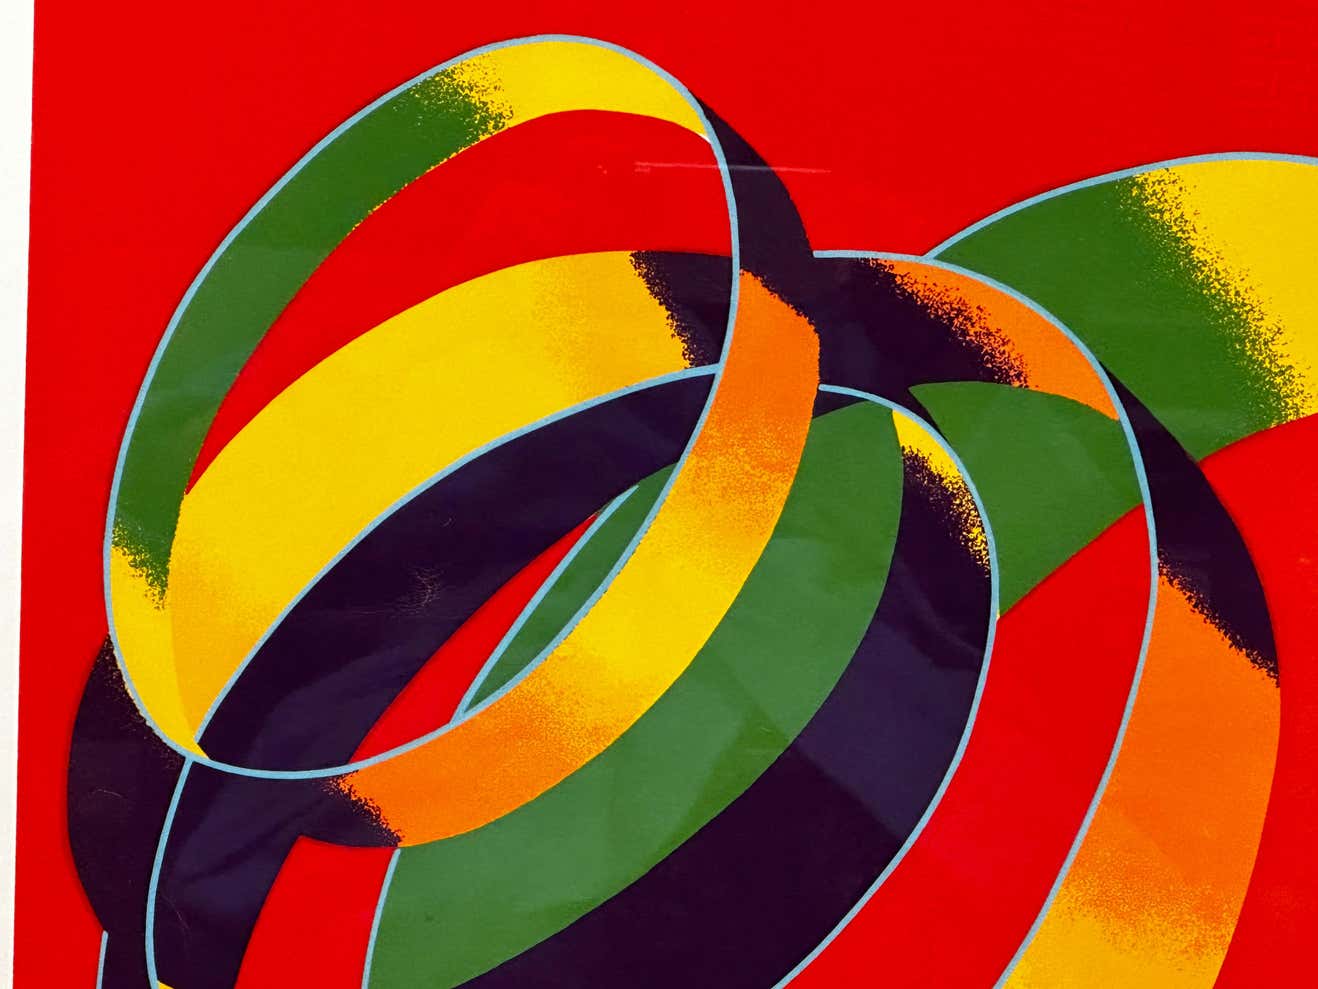 "Multicolour Spiral" Geometric Lithograph Abstract by Jack Brusca